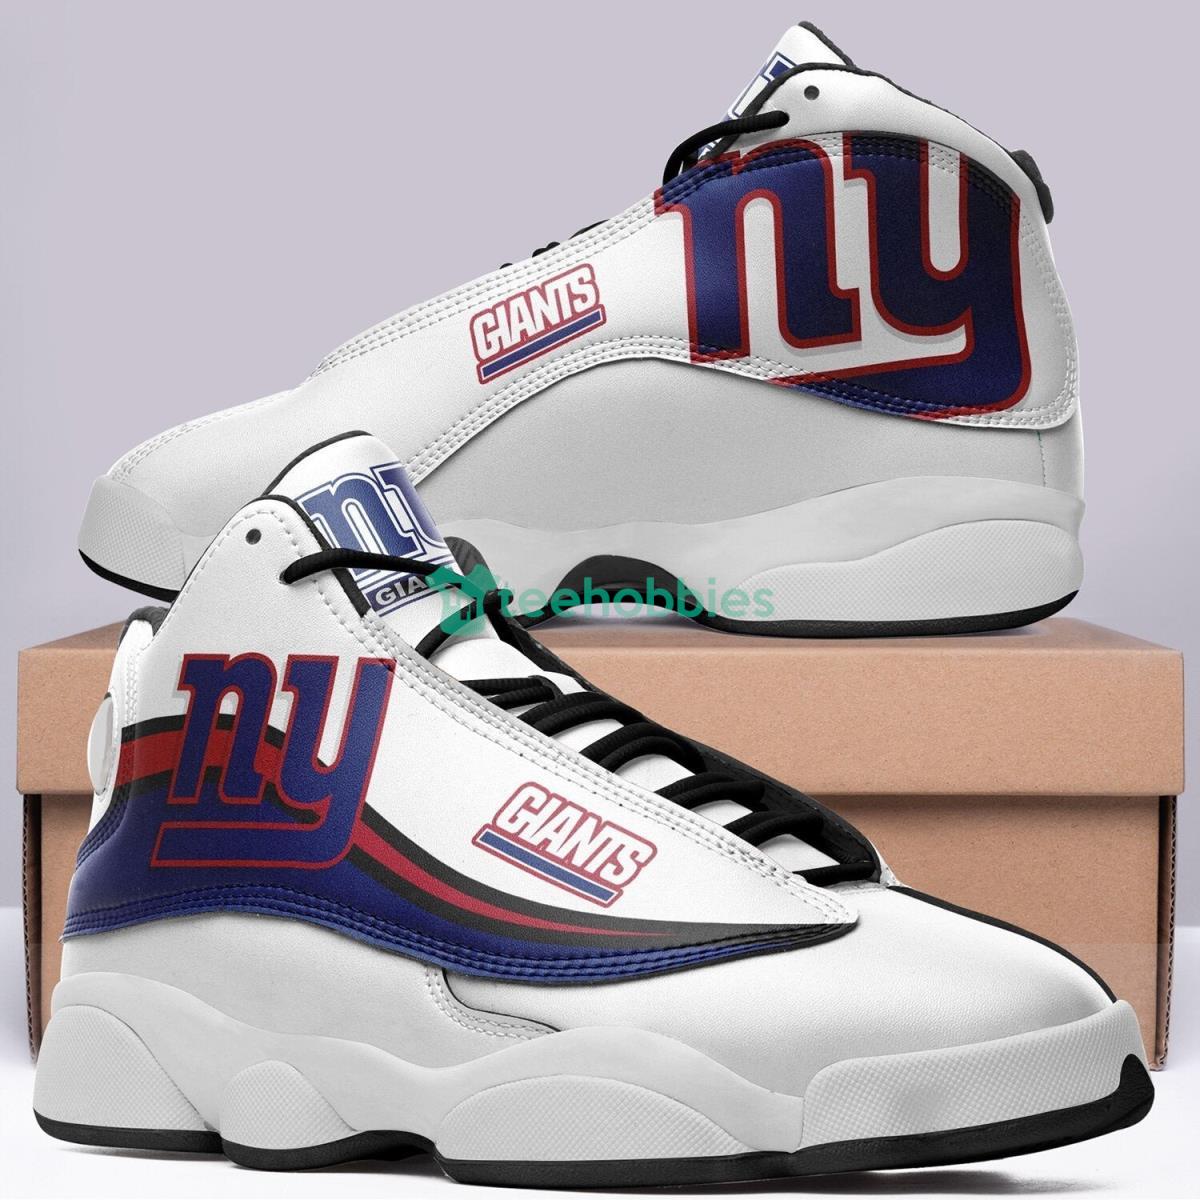 New York Giants Air Jordan 13 Shoes Running Casual Sneakers Product Photo 1